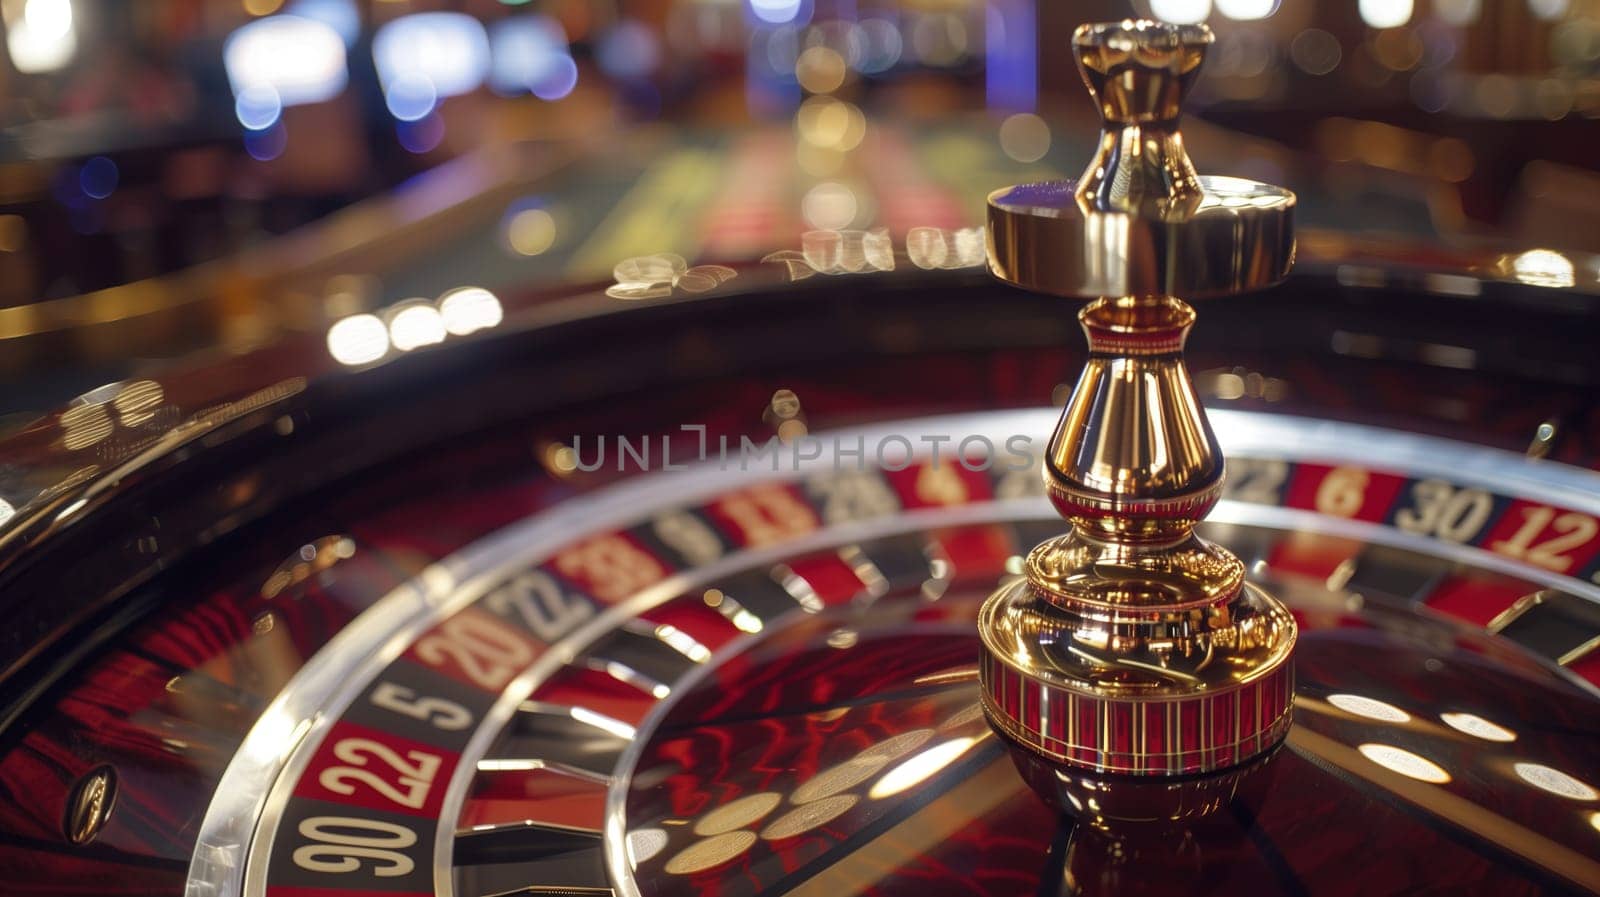 A close-up of a roulette wheel at the peak of a gambling session, with the focus on the shiny golden spinner and the blurred background suggesting the bustling atmosphere of a casino floor. The richly colored numbers and pockets add to the luxurious feel of the game.